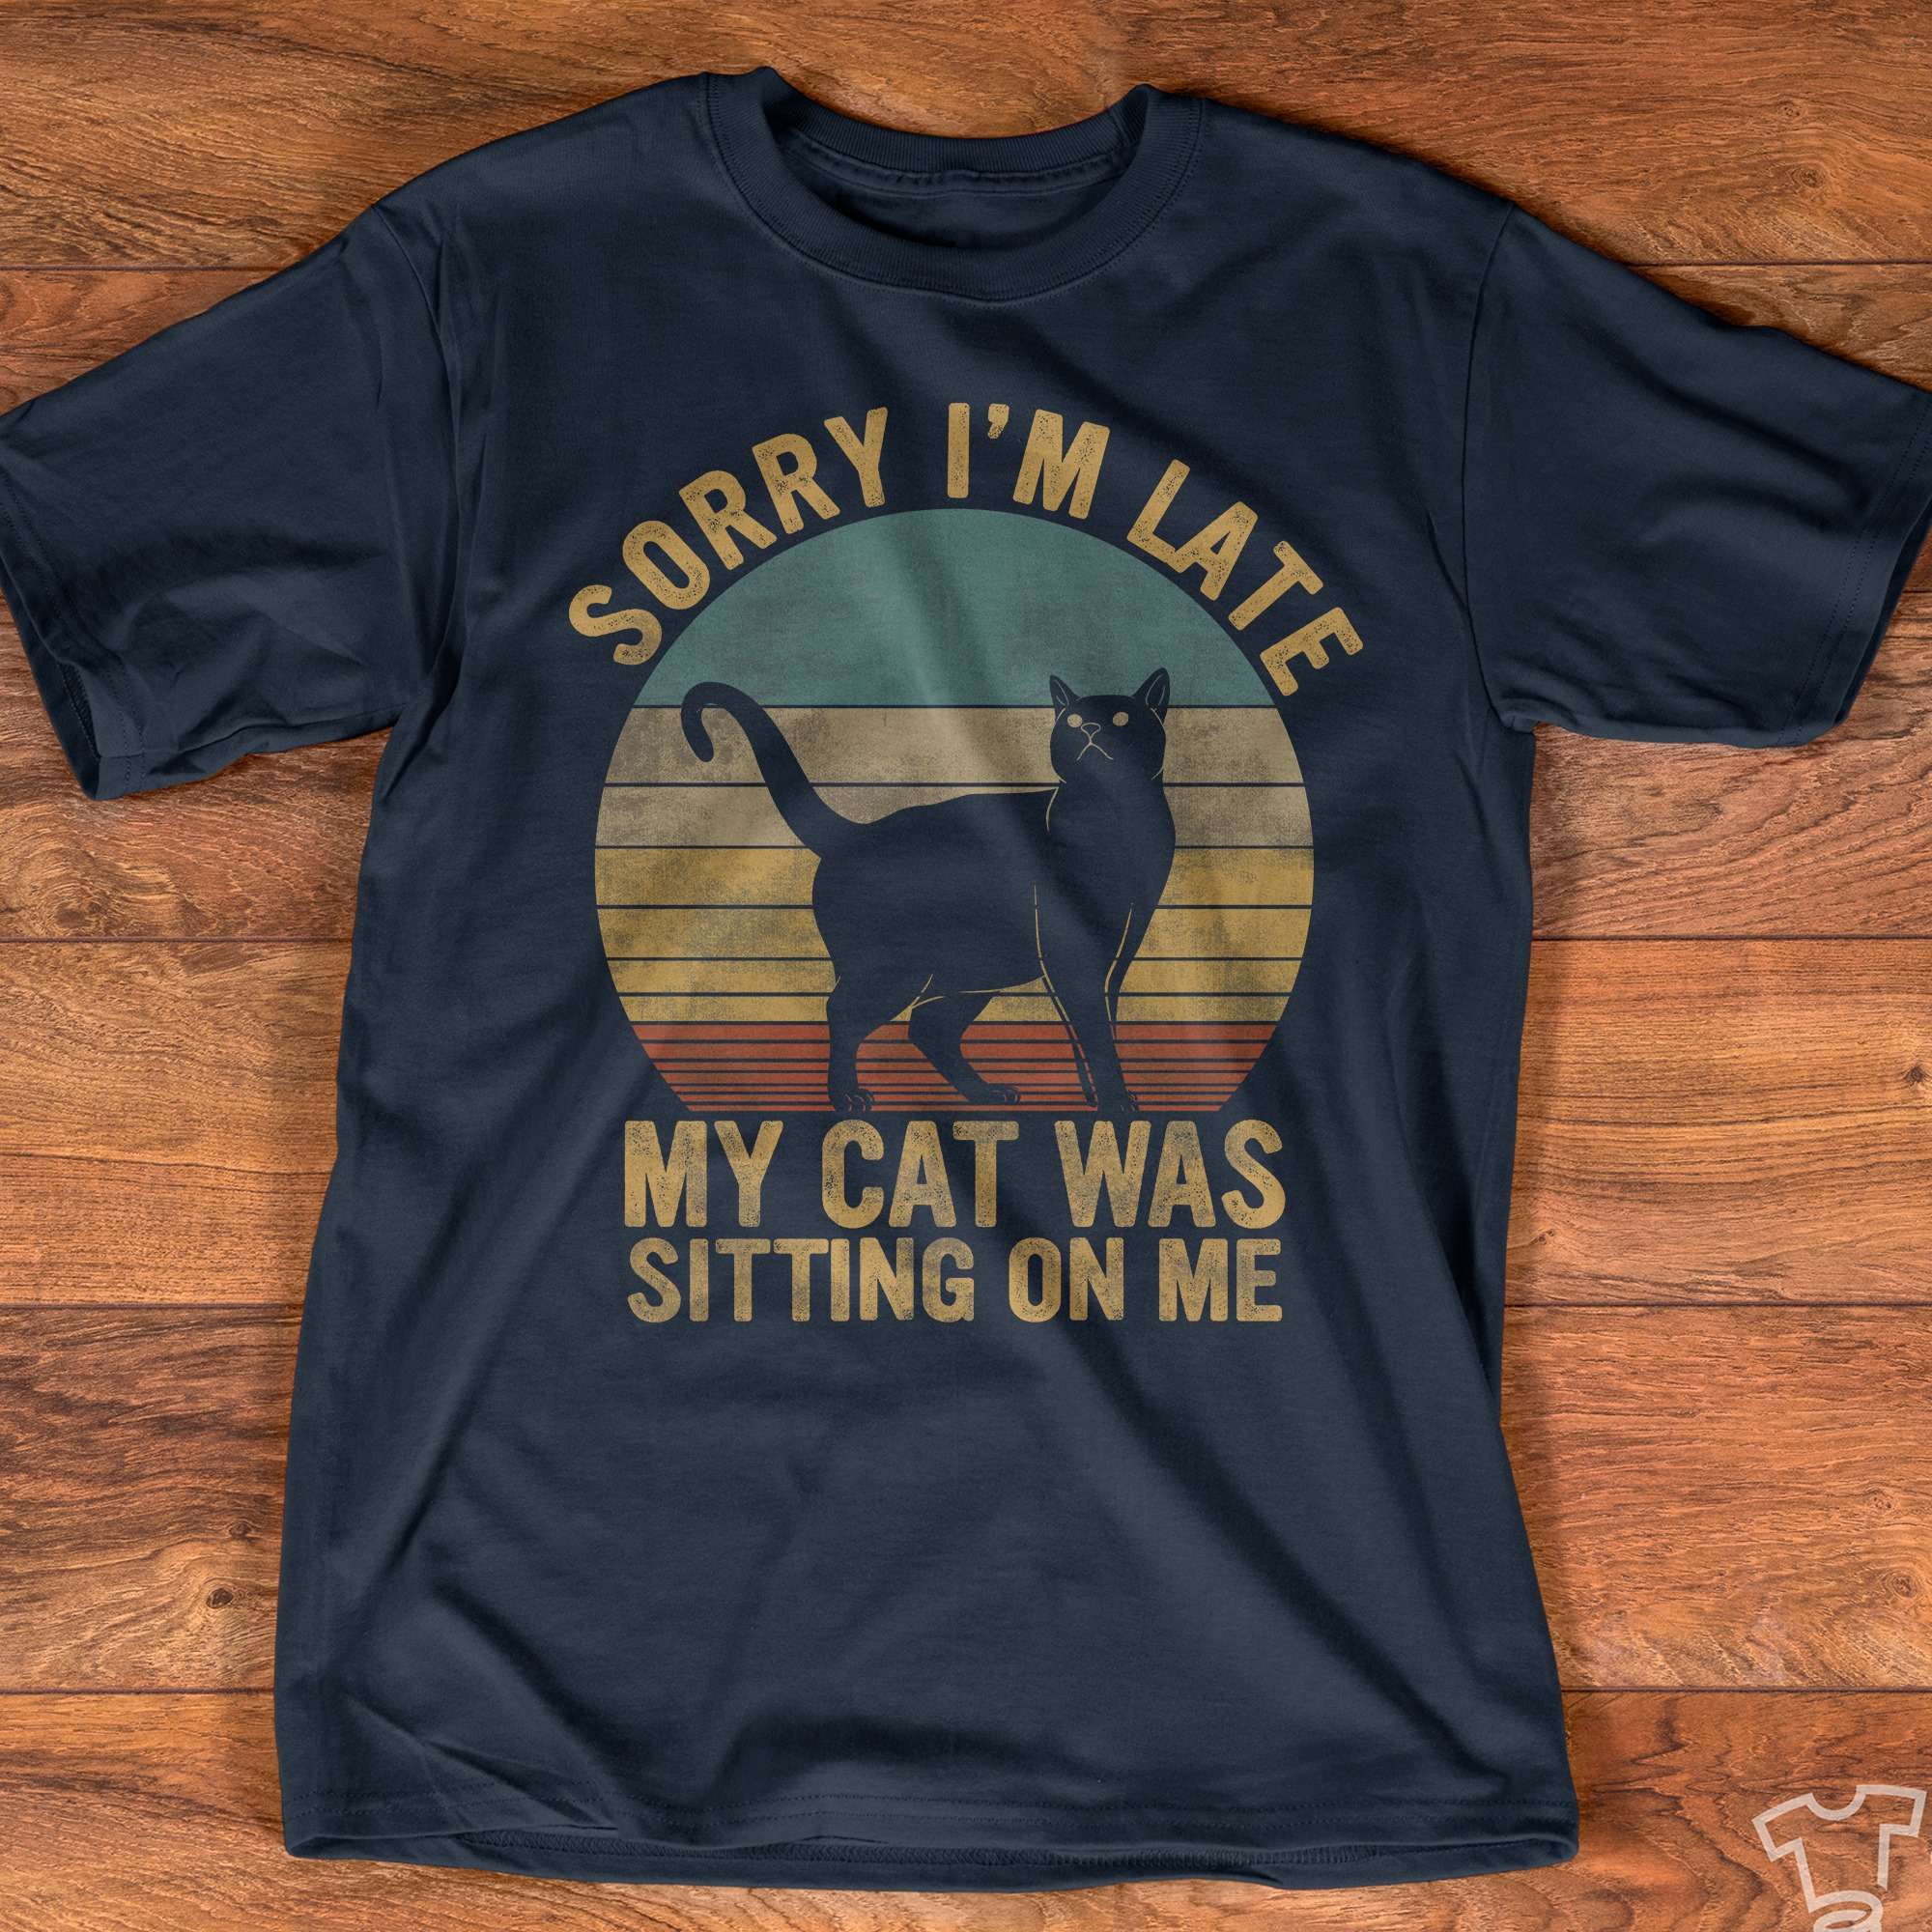 Sorry i'm late my cat was sitting on me - Pet Cat, Cat Lover